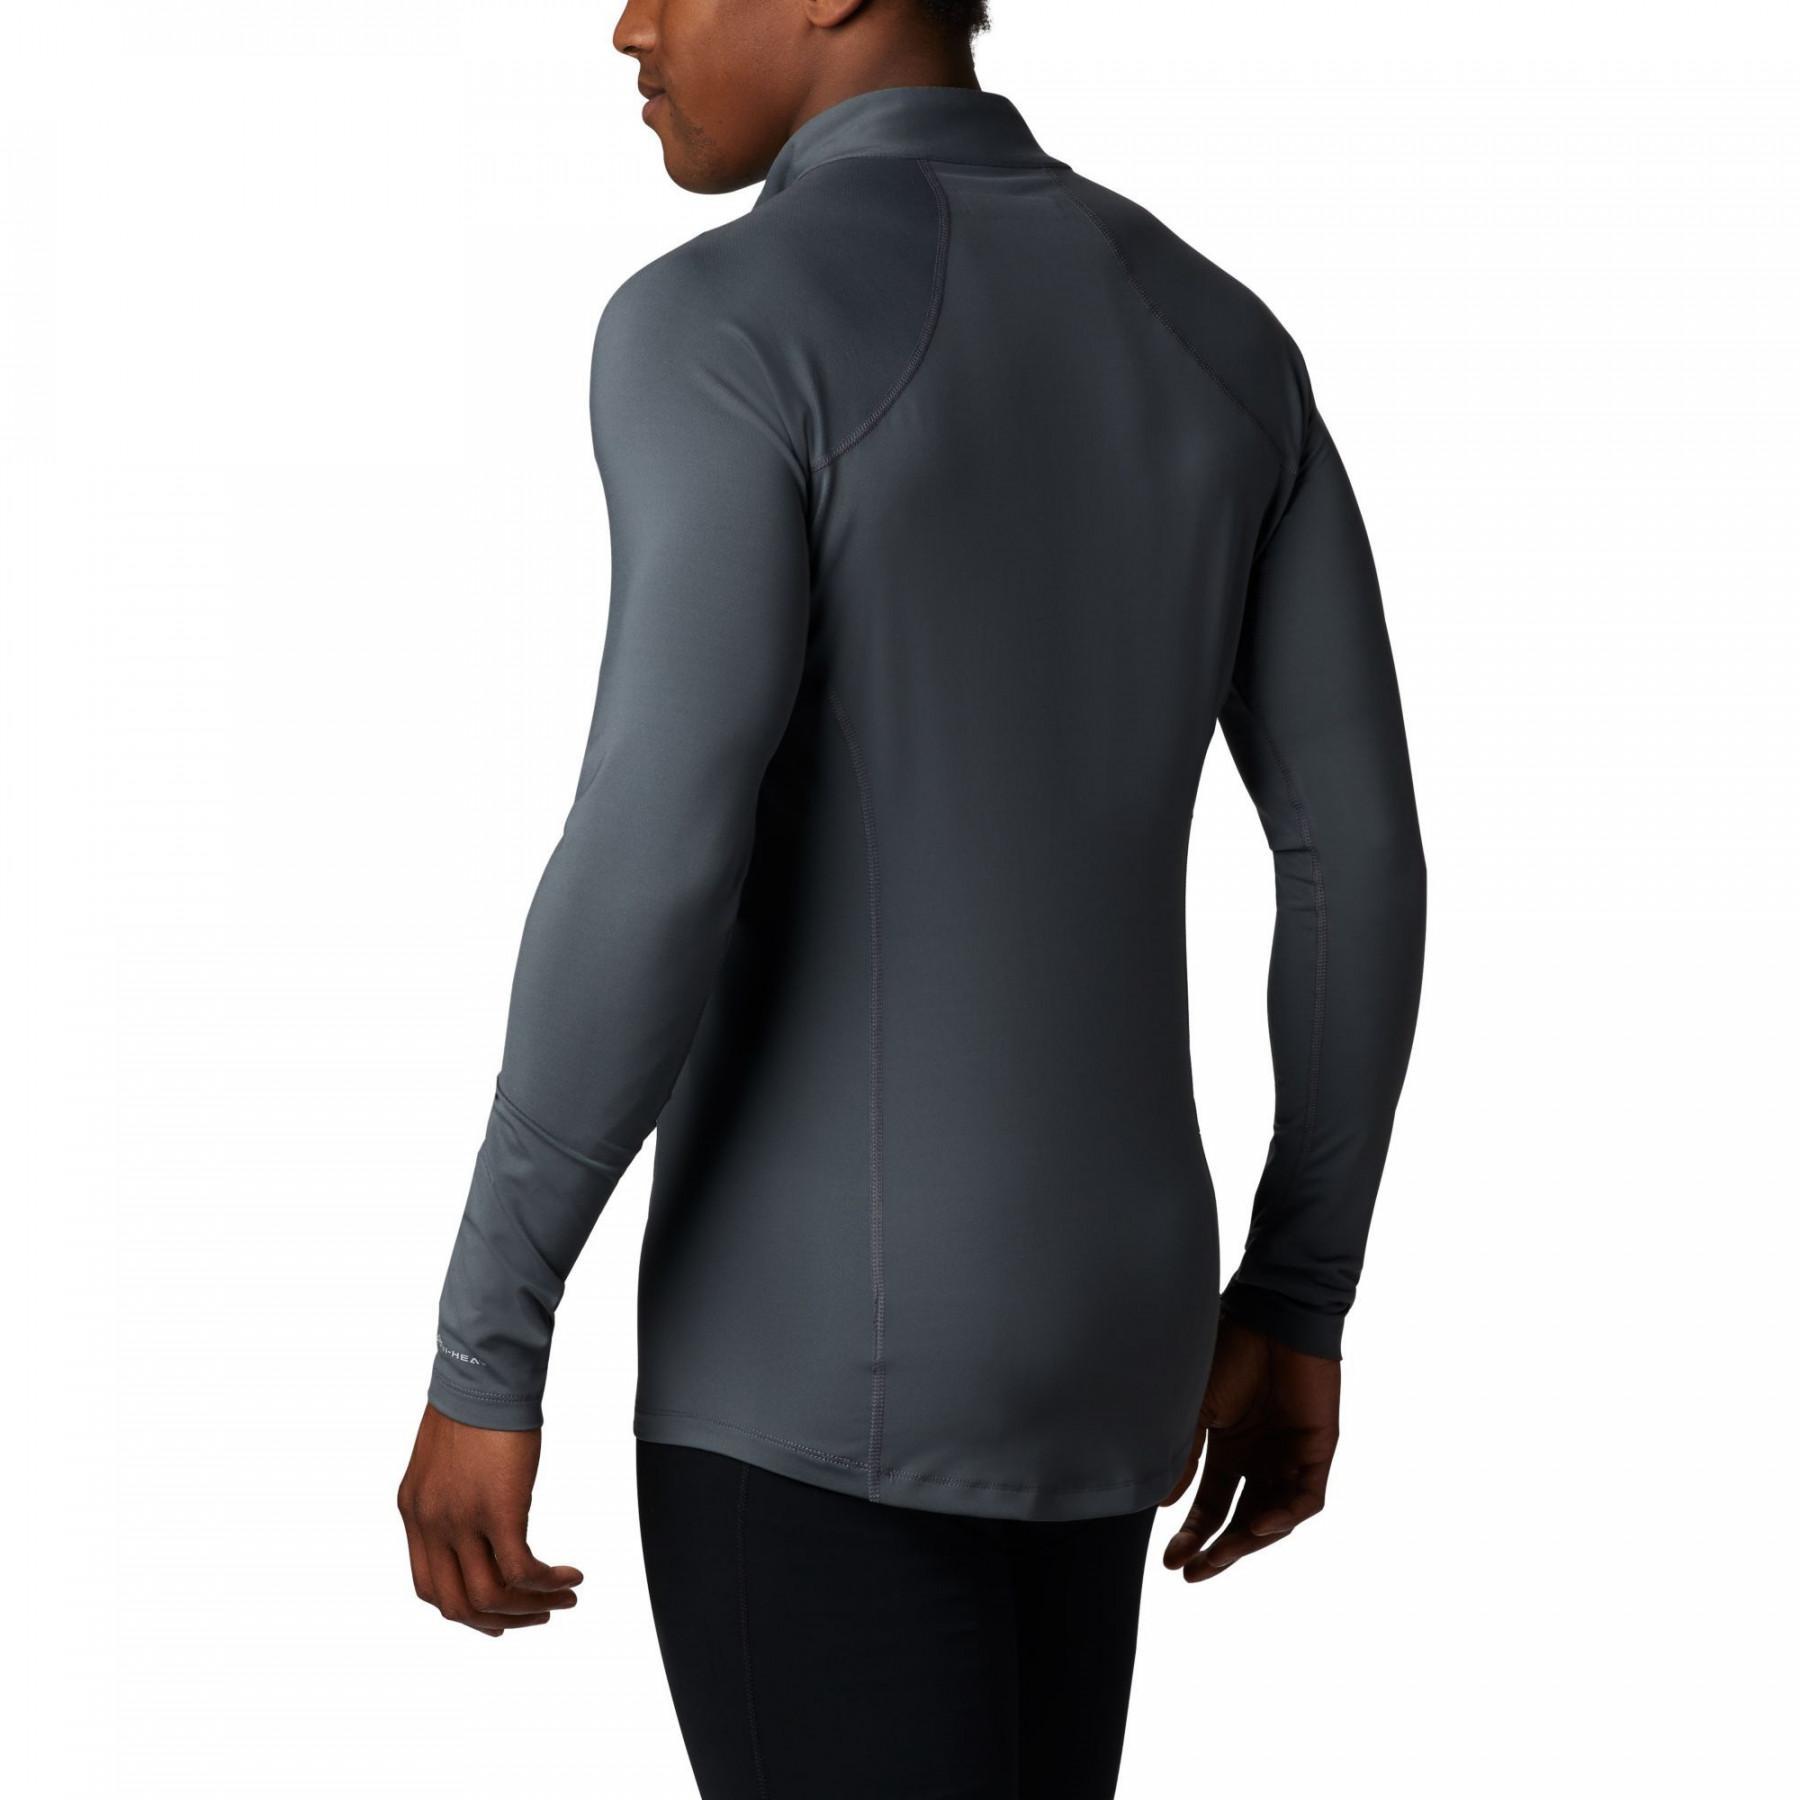 Maillot de compression 1/2 zip Columbia Midweight Stretch